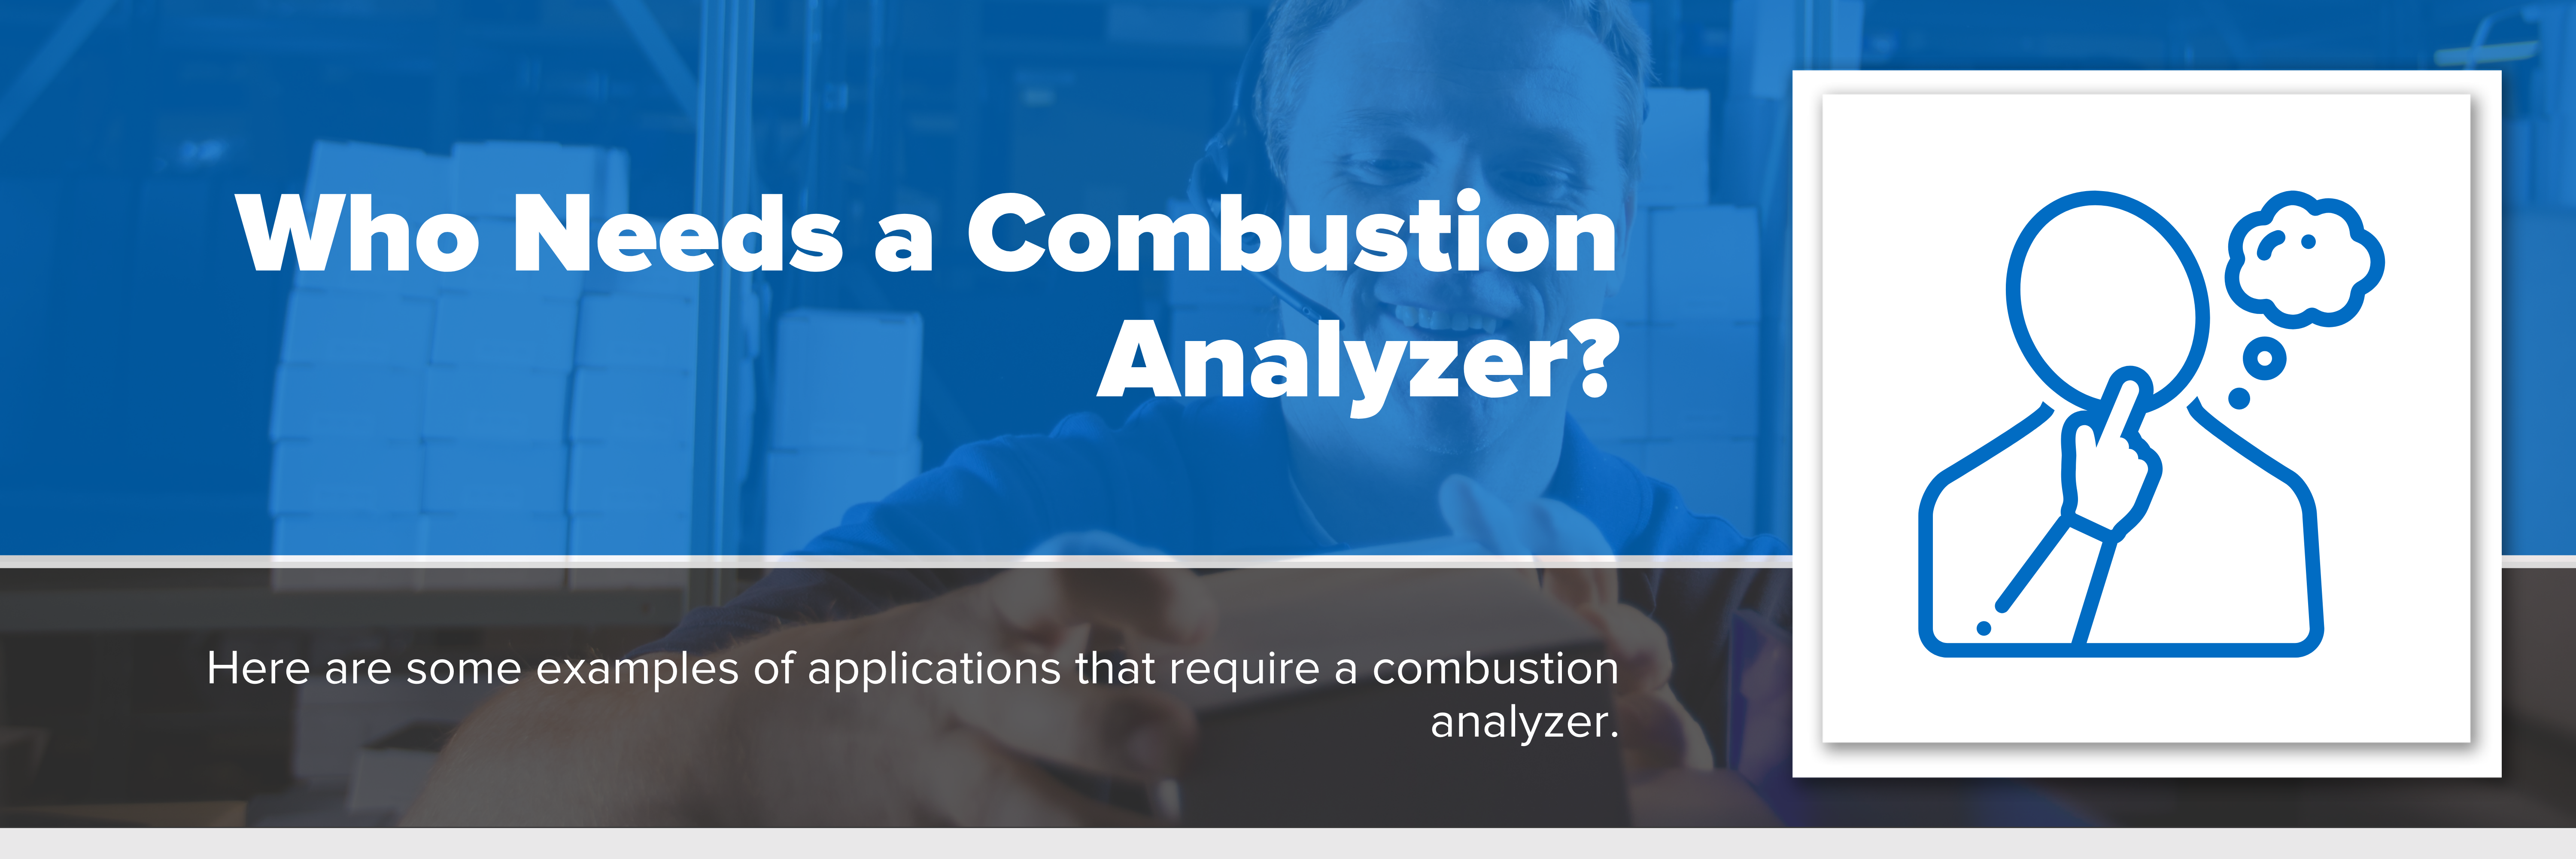 Header image with text "who needs a combustion analyzer?"